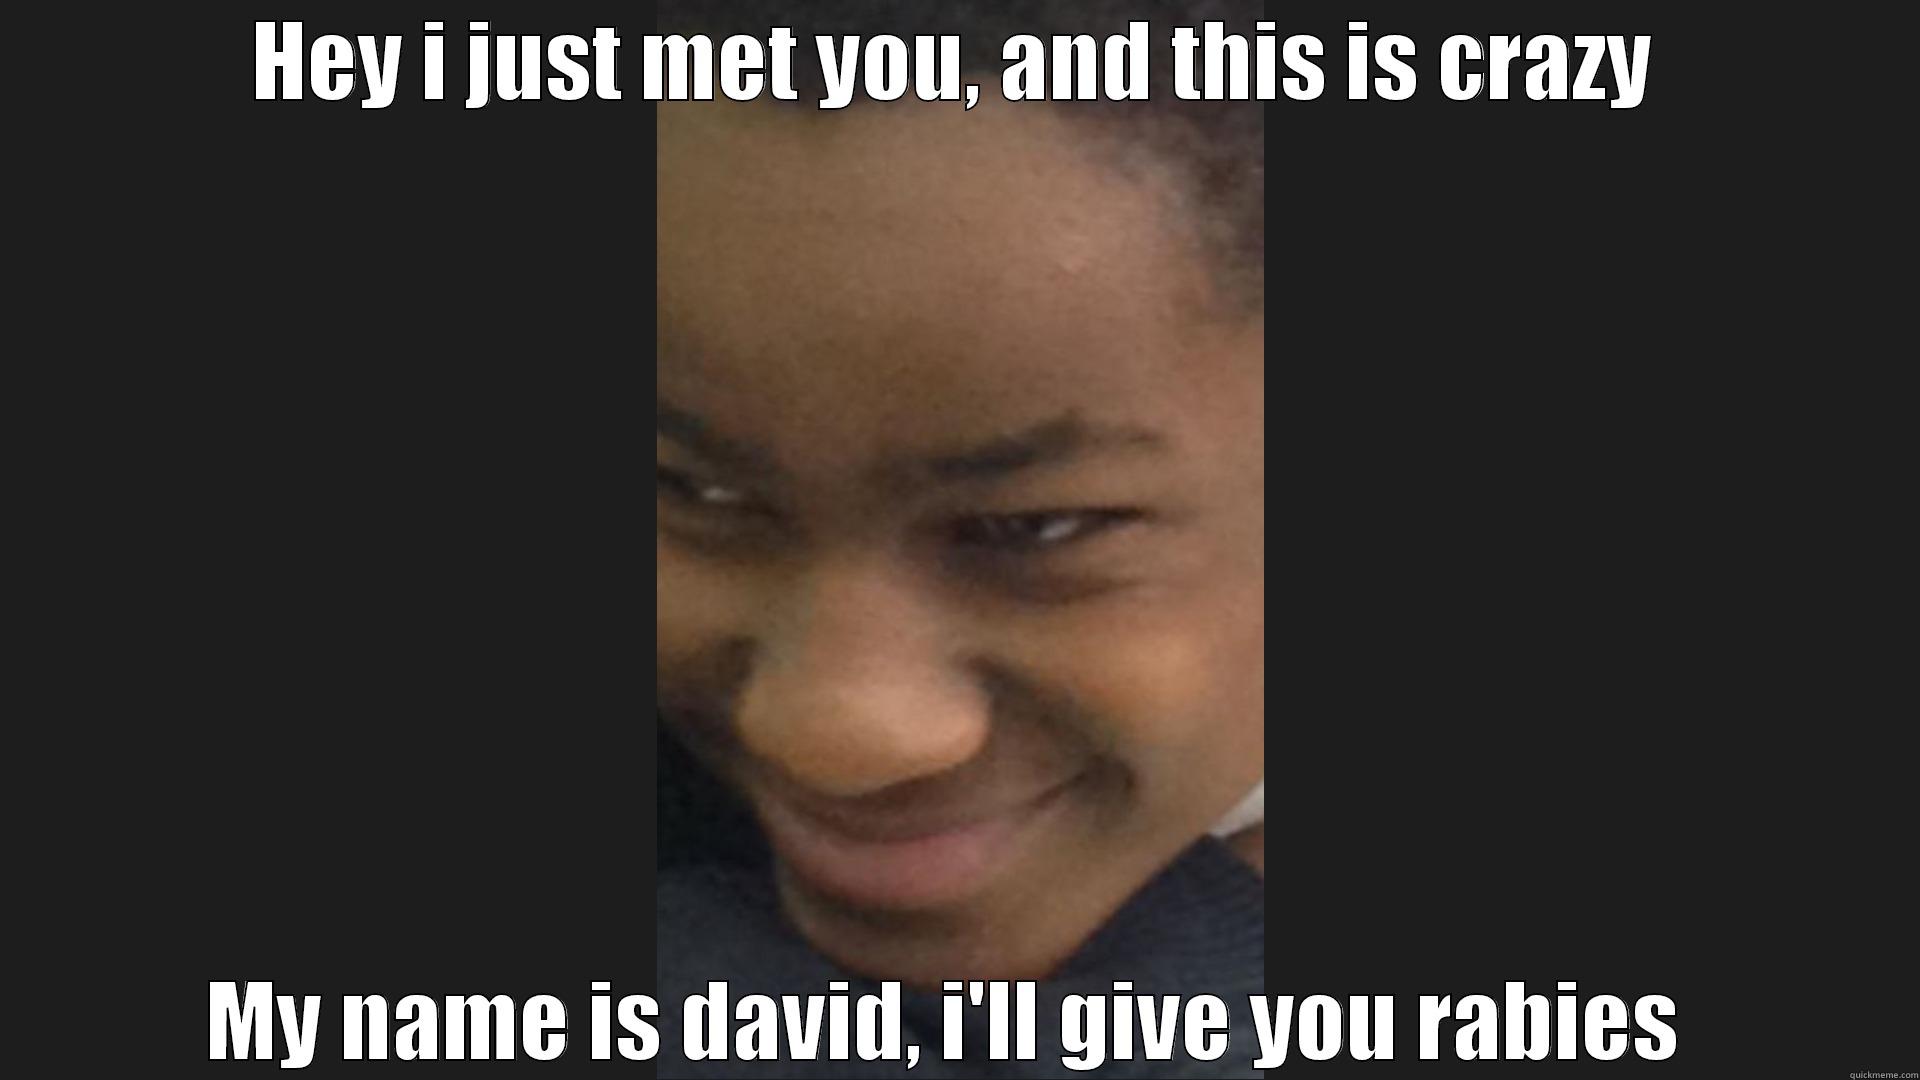 David Meme XD - HEY I JUST MET YOU, AND THIS IS CRAZY MY NAME IS DAVID, I'LL GIVE YOU RABIES  Misc